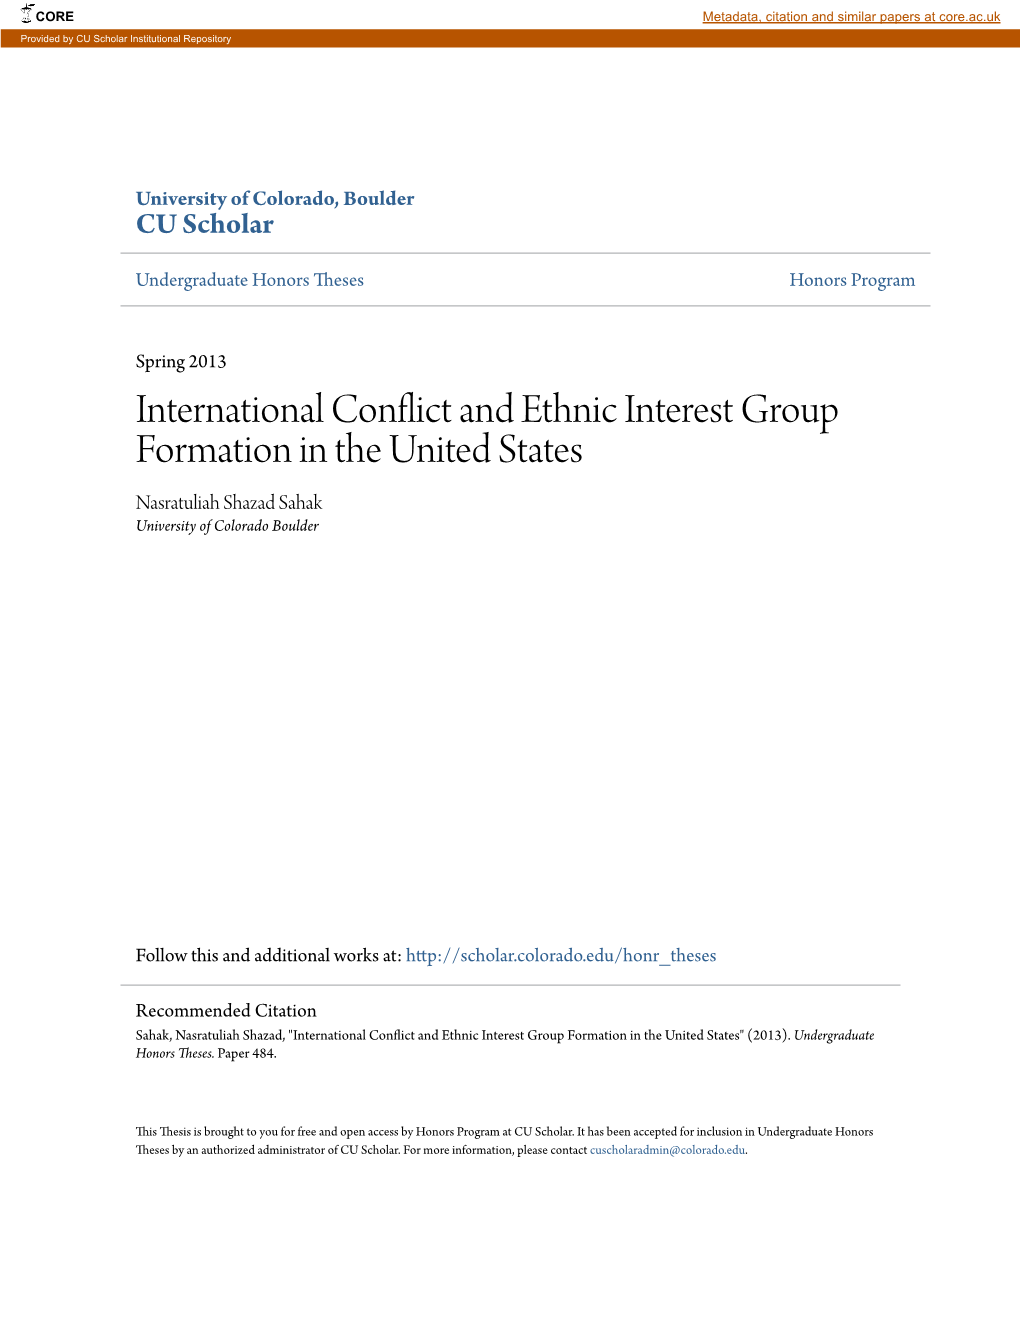 International Conflict and Ethnic Interest Group Formation in the United States Nasratuliah Shazad Sahak University of Colorado Boulder